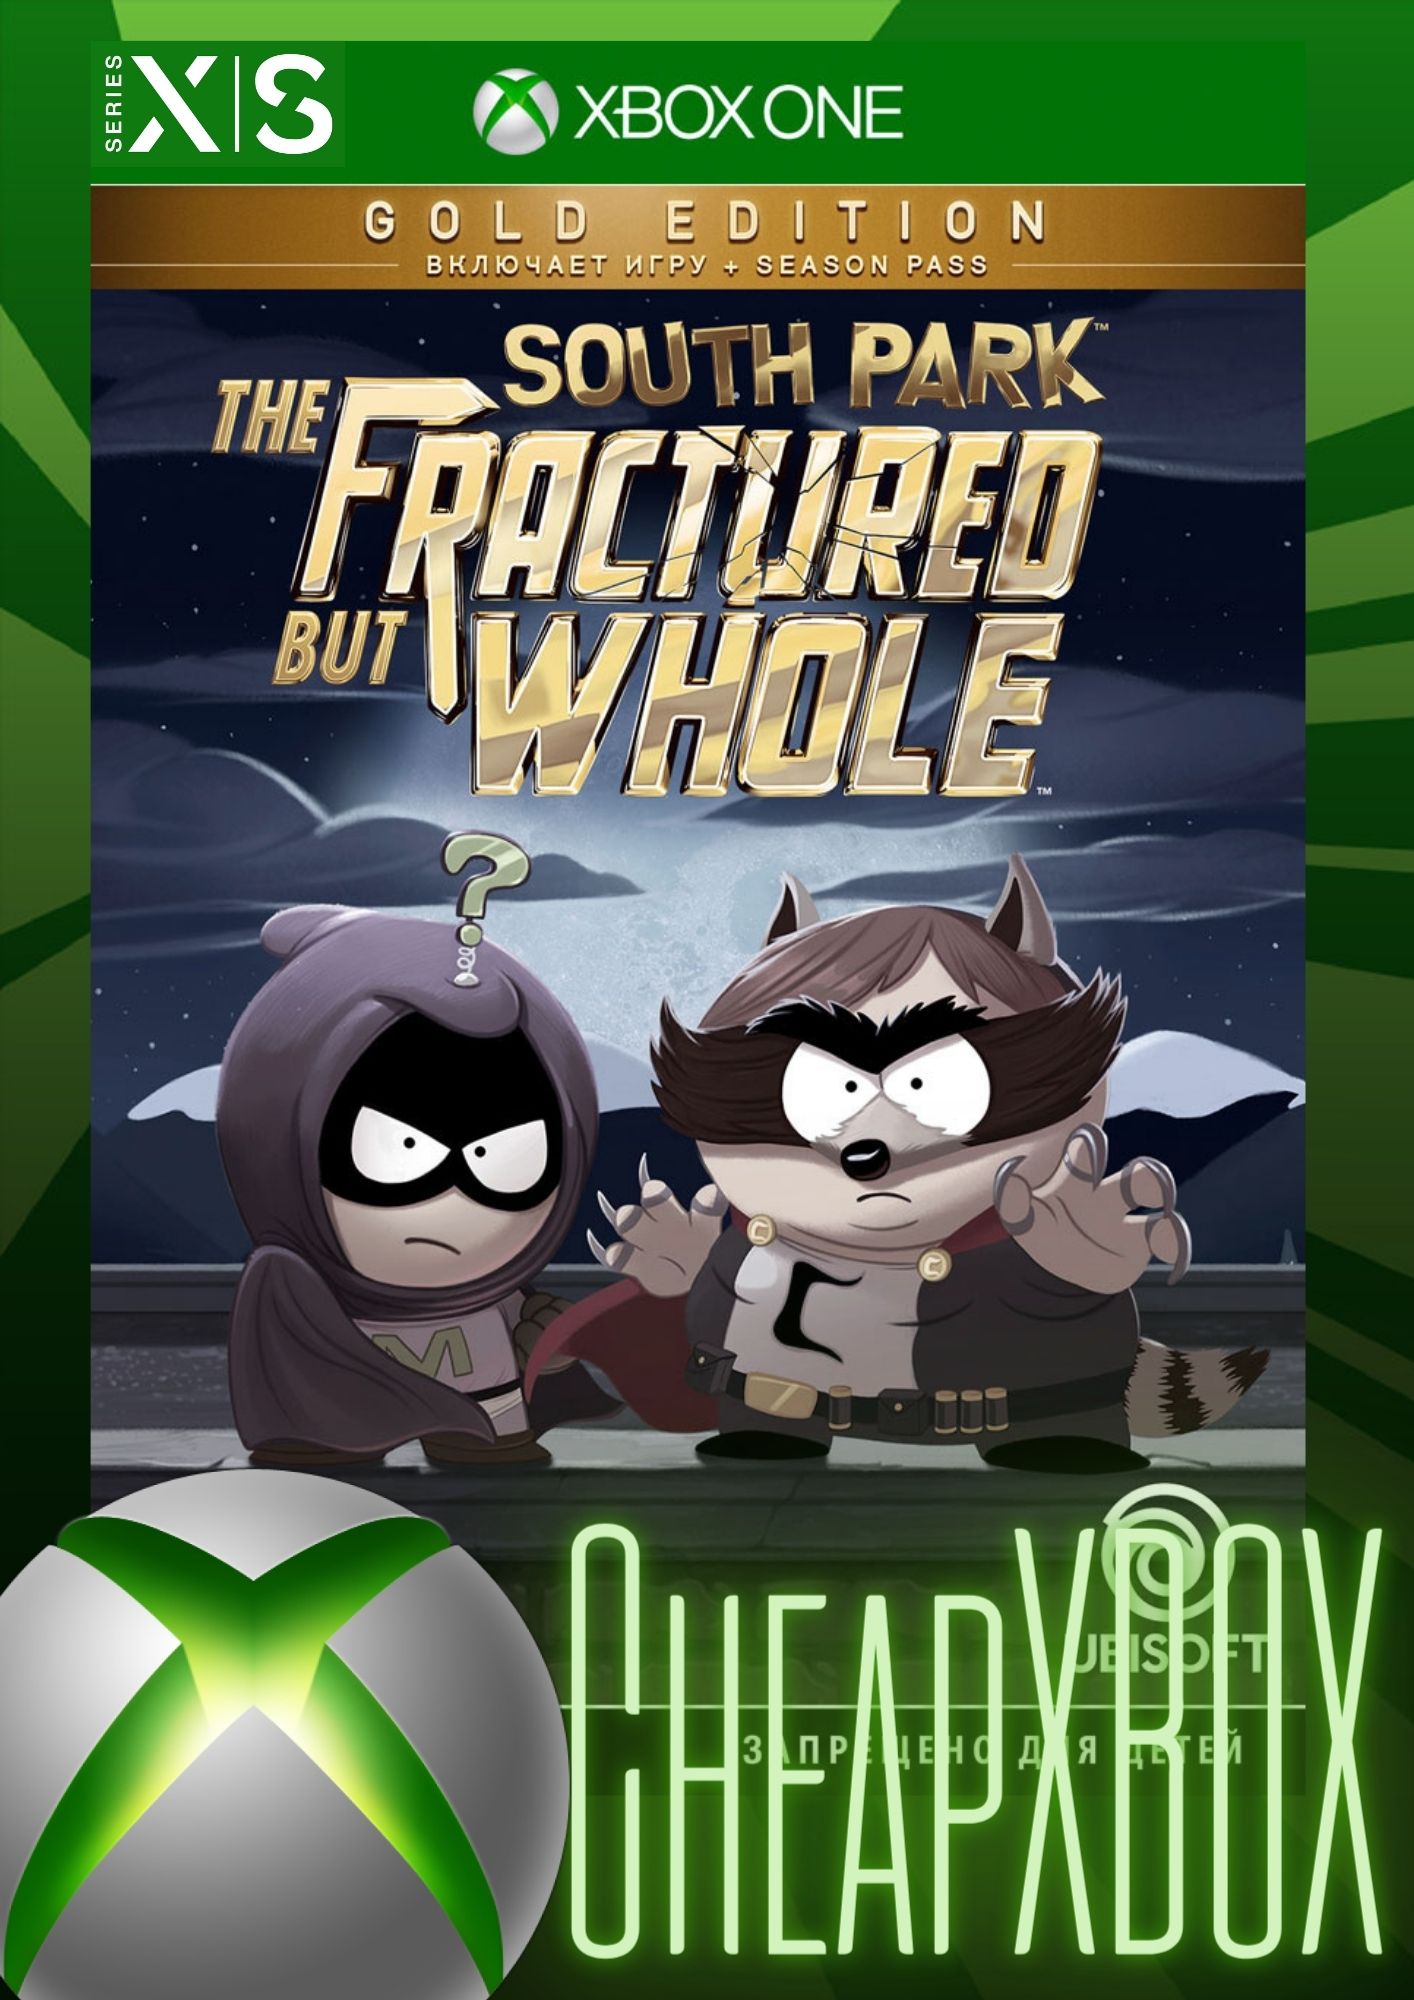 South park the fractured but whole купить ключ стим фото 3